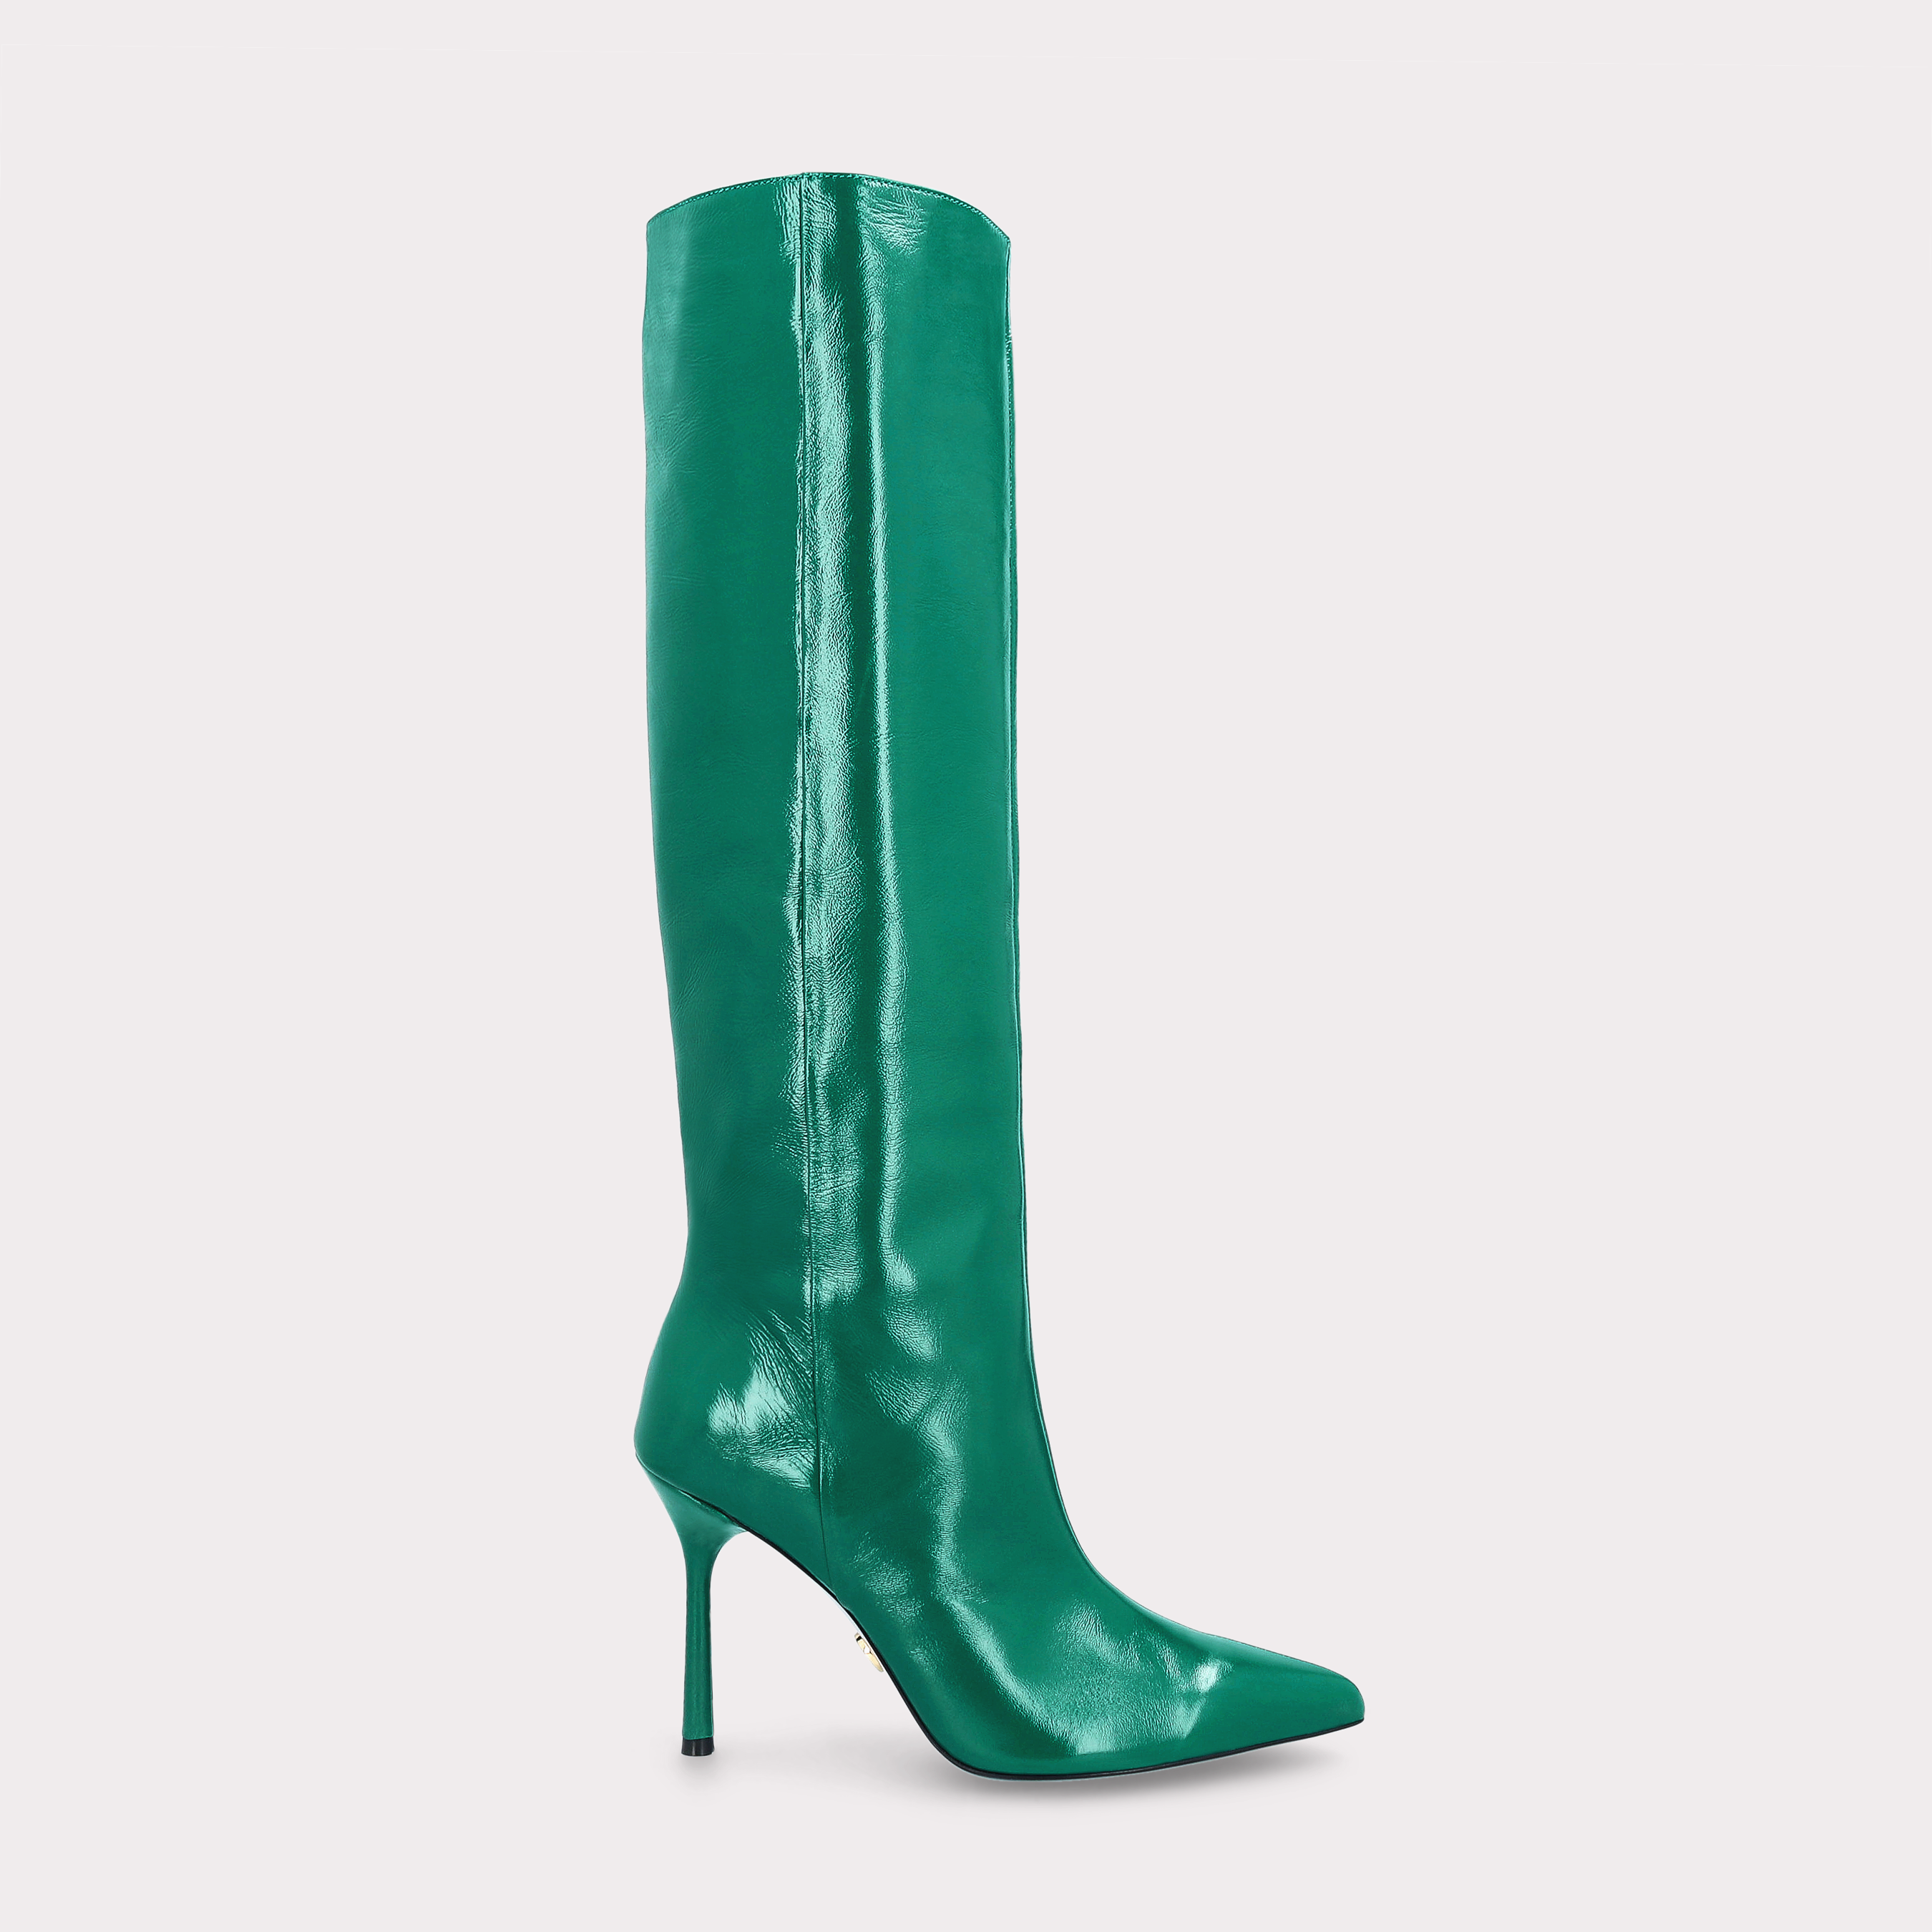 ABA TUBO GREEN CRUSHED PATENT LEATHER BOOTS